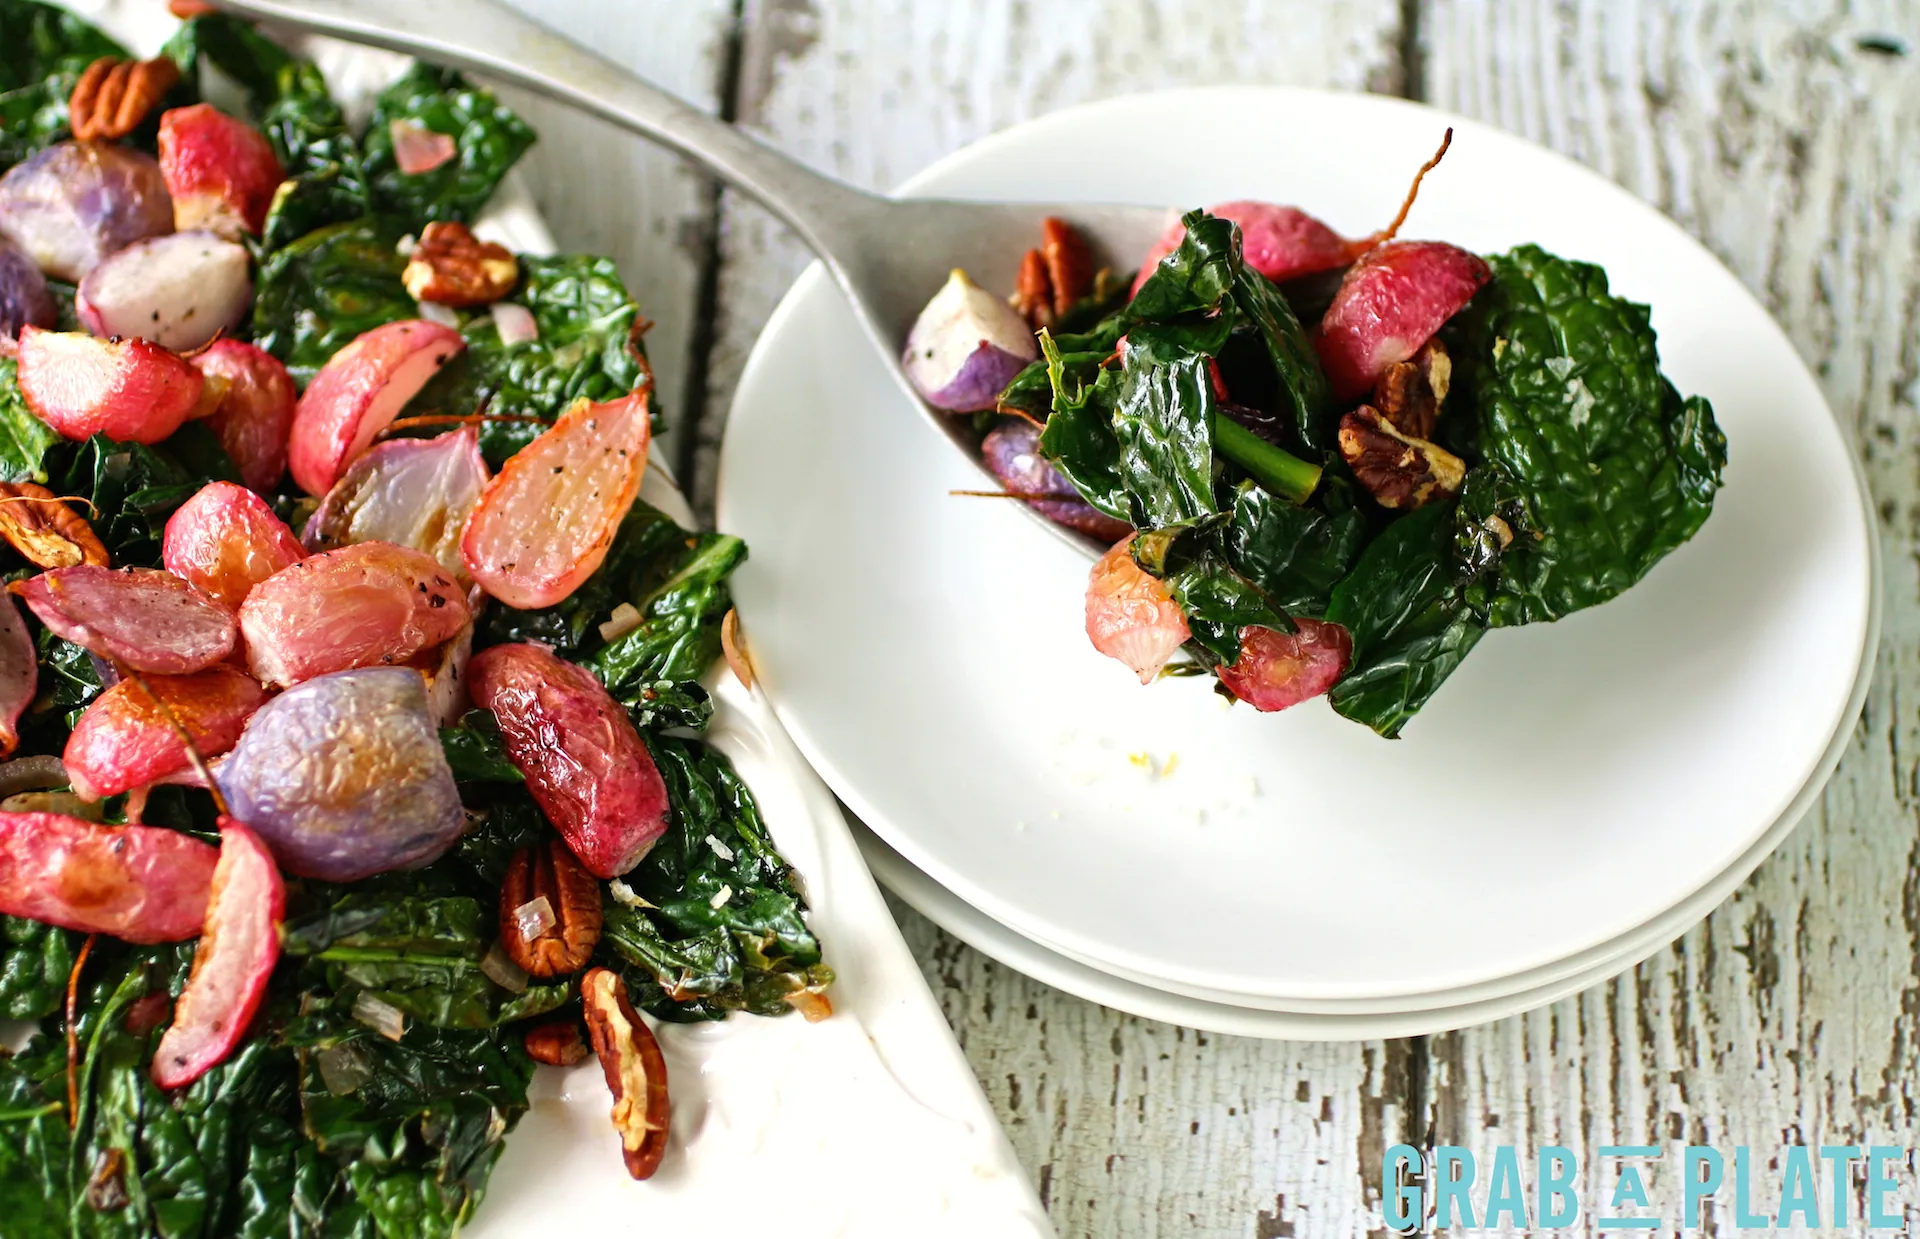 Dig into Roasted Radishes and Sauteed Kale with Citrus Salt